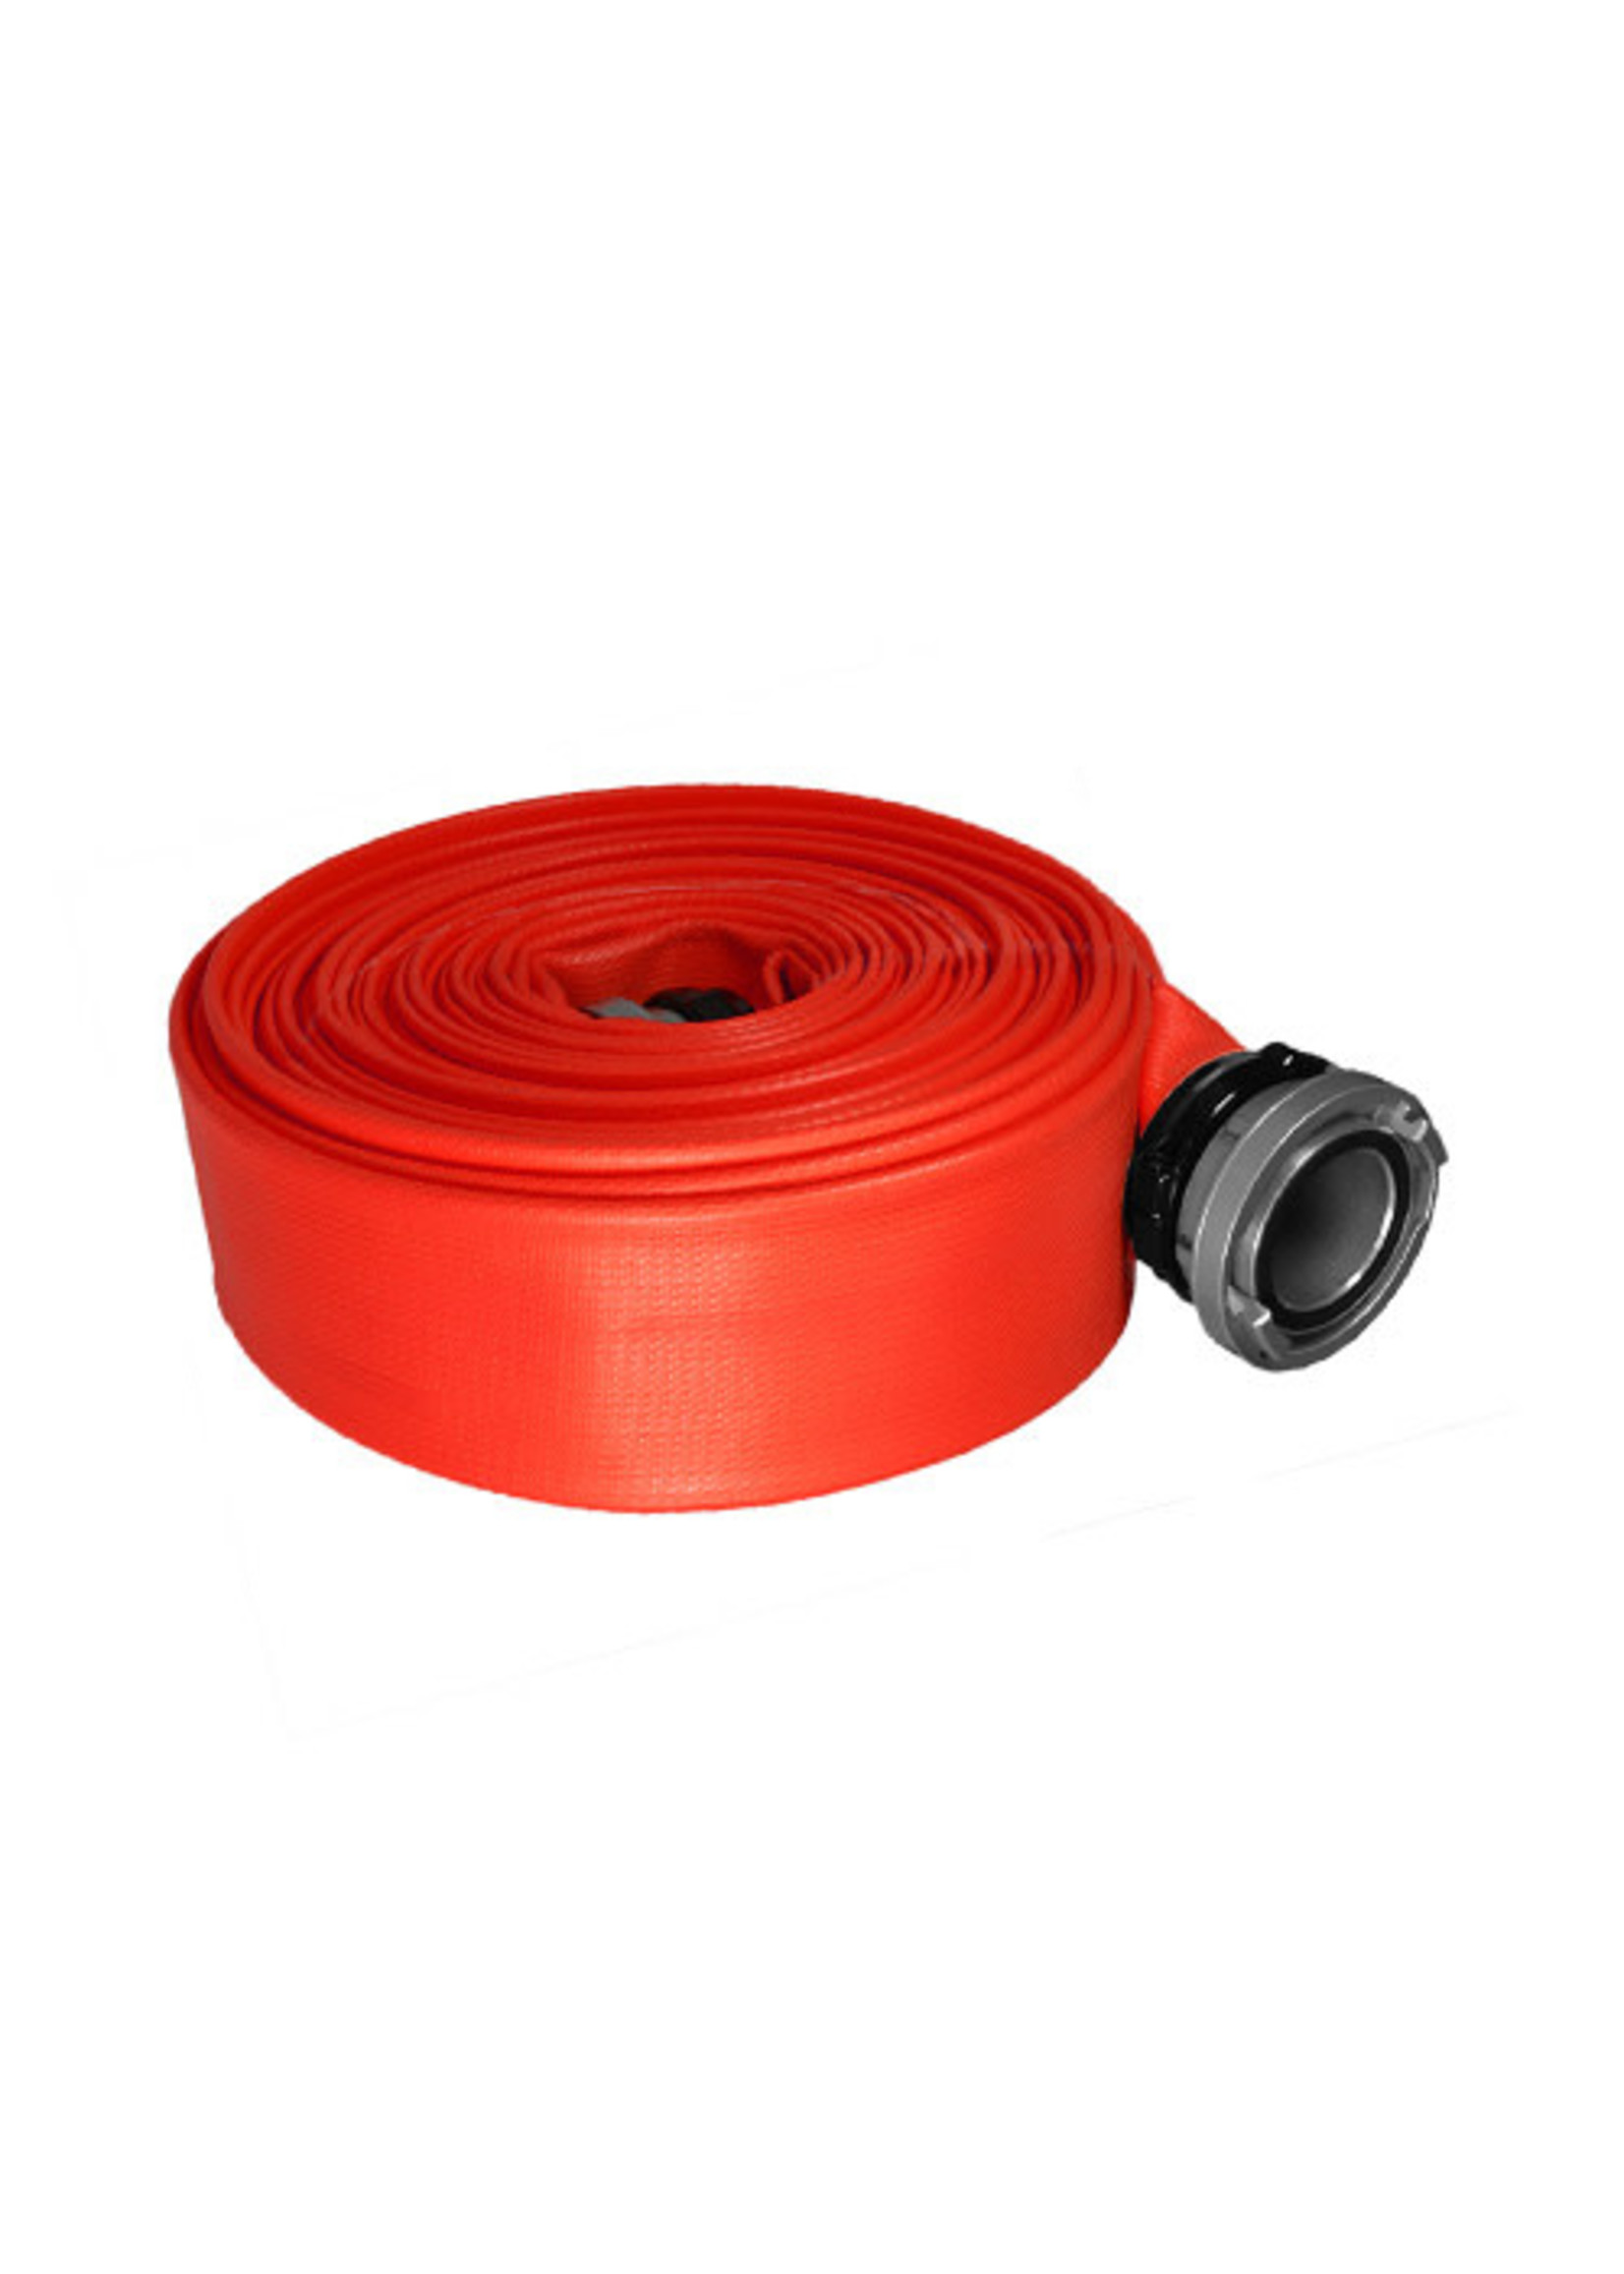 Fire Hose 5'' Storz, 100' Red